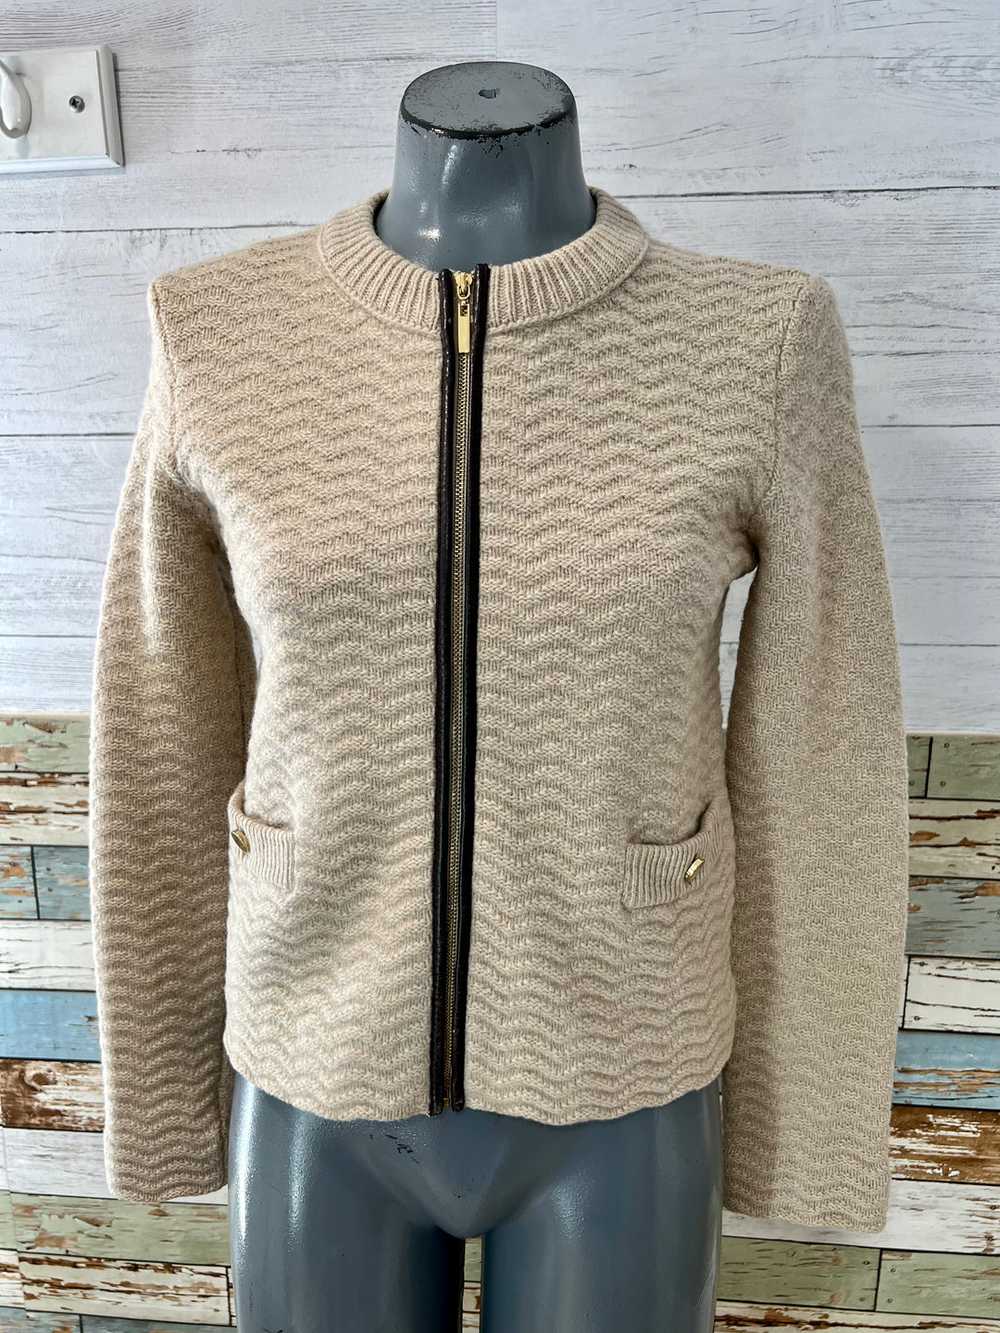 00’s Zip Cropped knit Jacket by Tory Burch - image 1